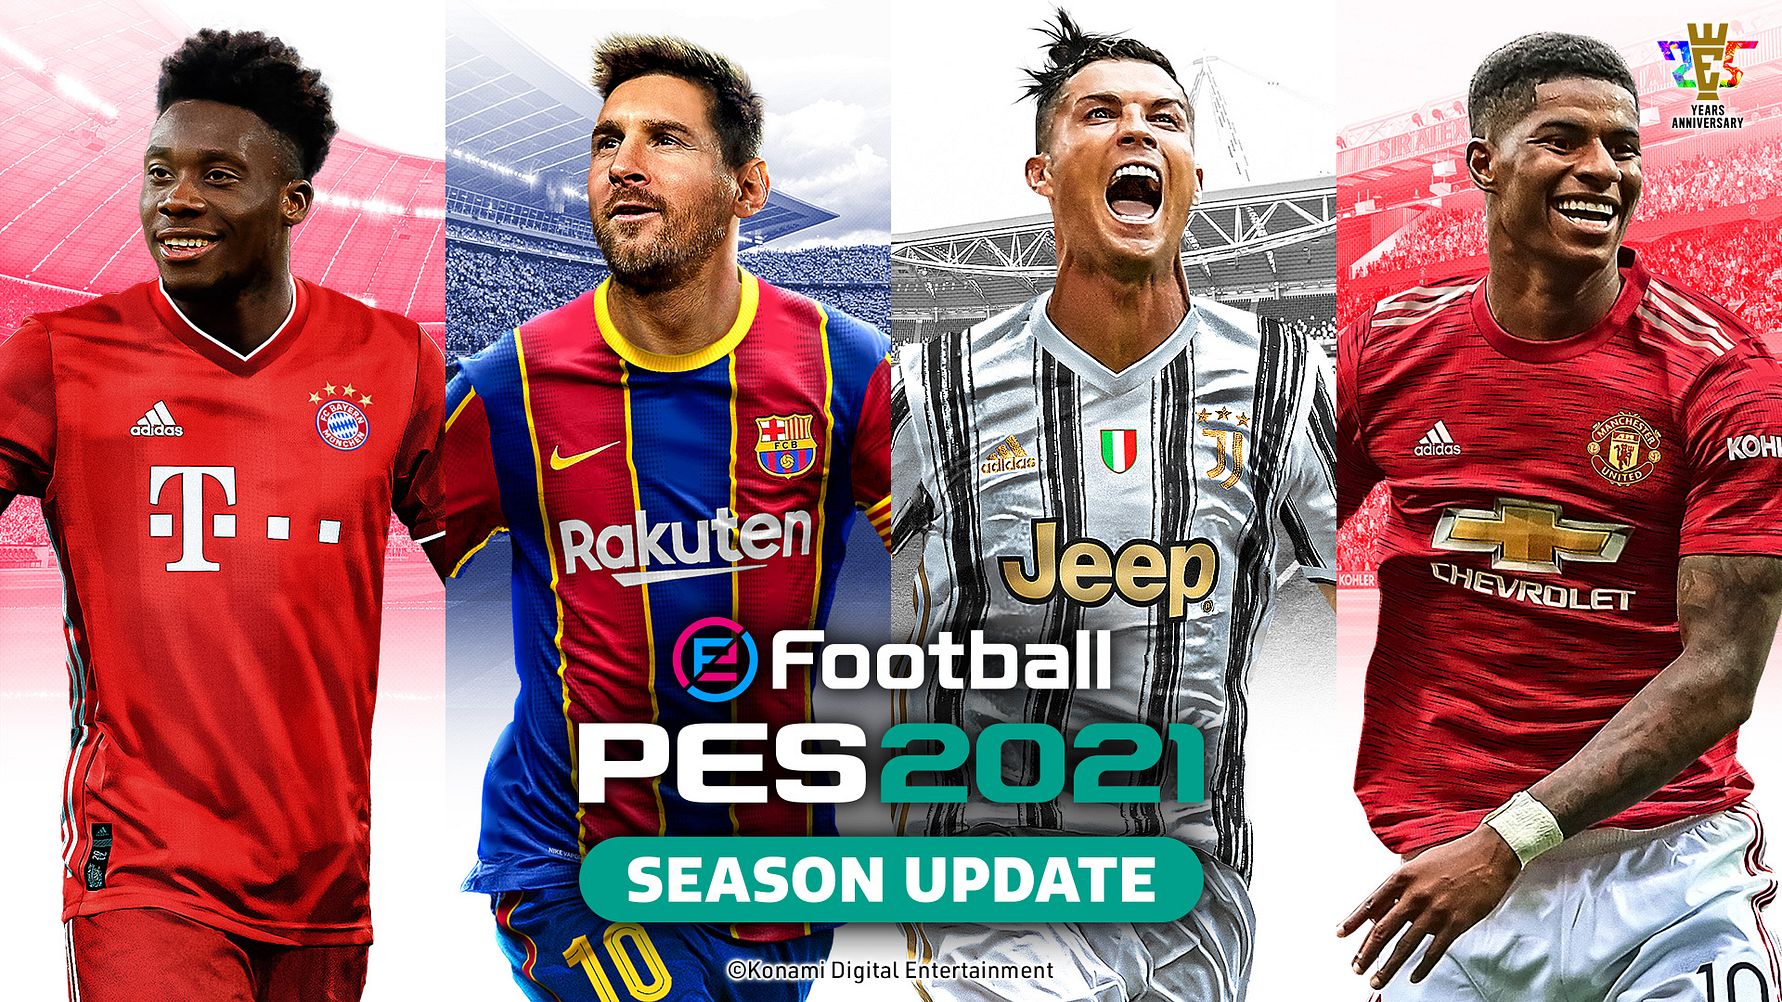 insuficiente si subterraneo FINAL COVER REVEALED FOR eFootball PES 2021 SEASON UPDATE | Bastion